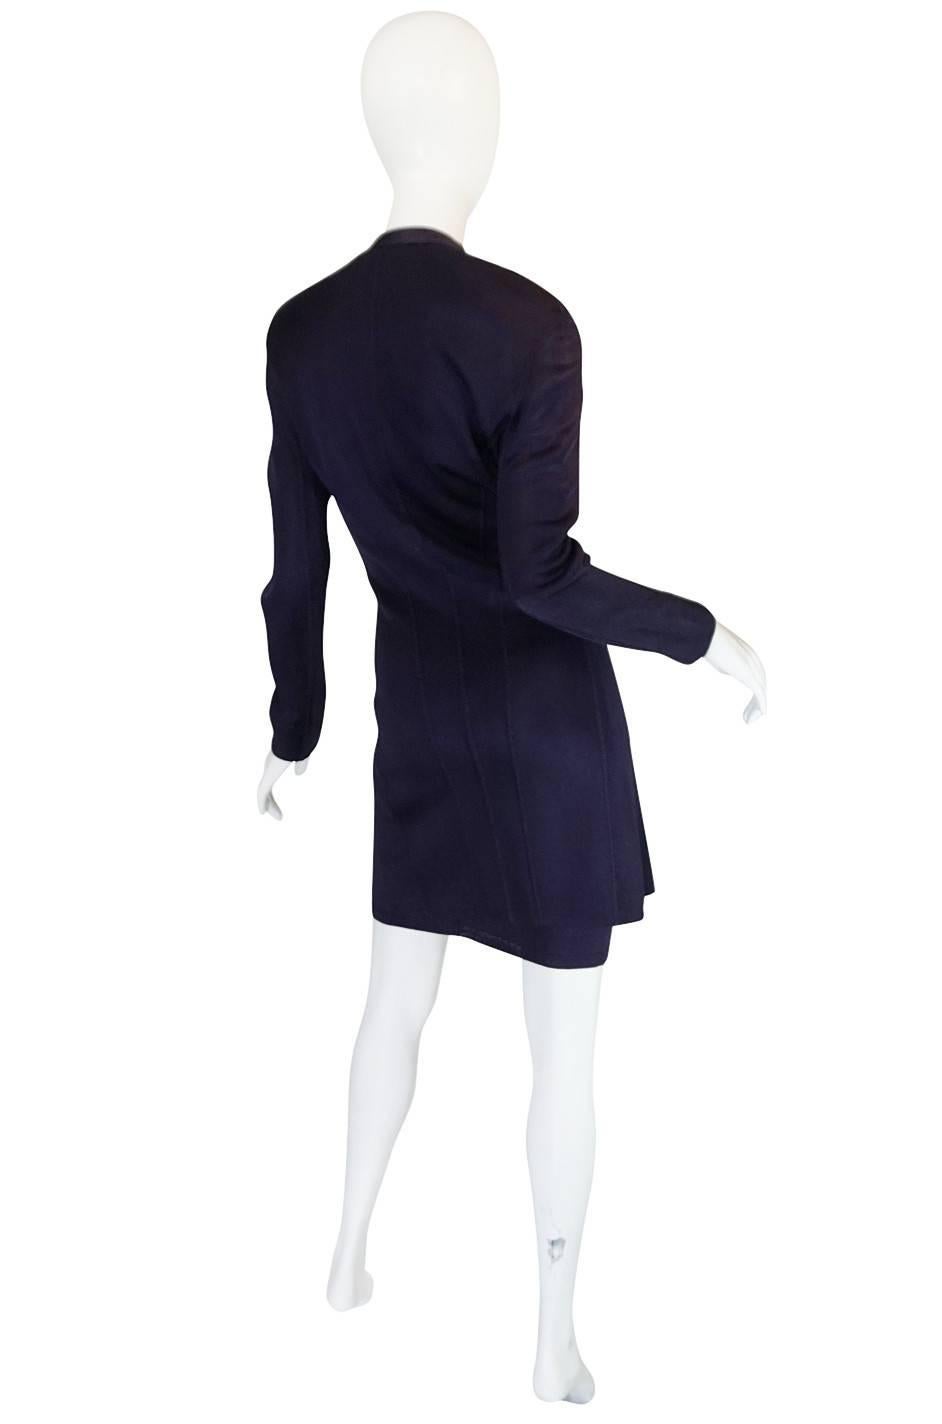 

In some of his earlier collections Azzedine did show more color and this is a great example of that. Both pieces are made from a fine and slinky knit with a polished sheen finish that has been dyed the perfect shade of purple. The inner dress is